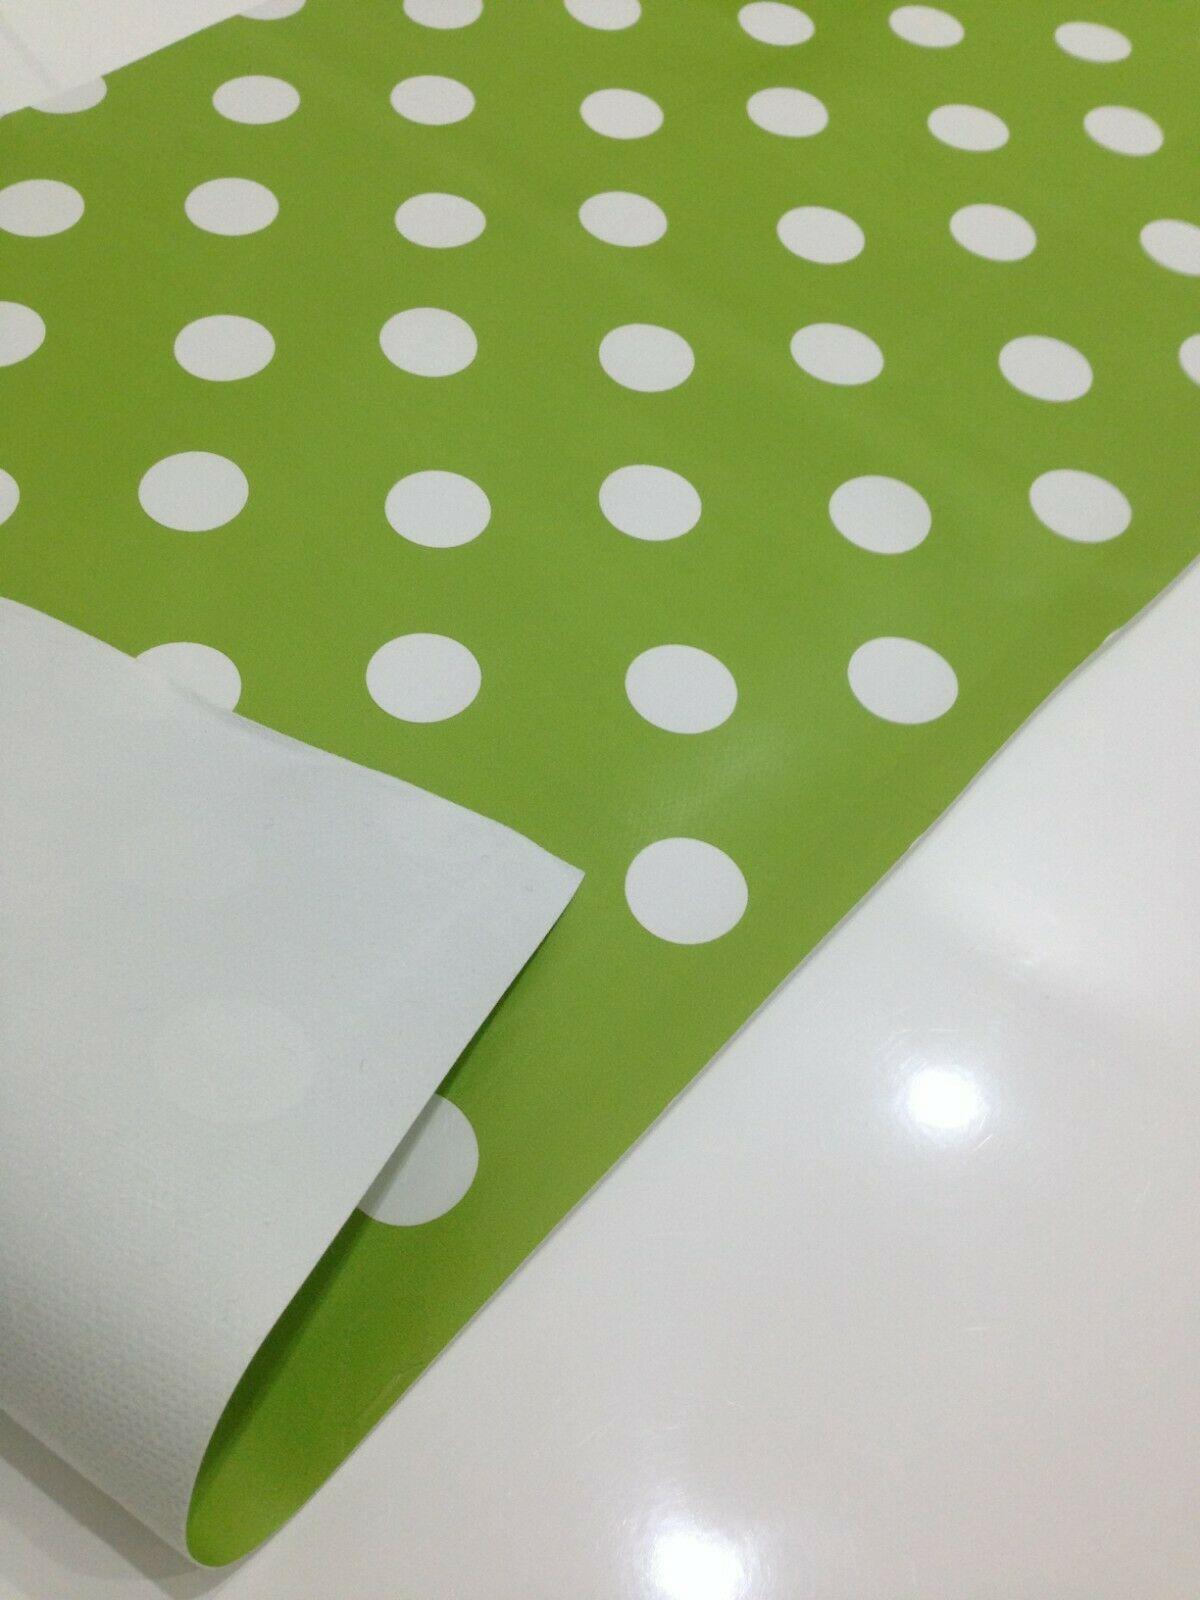 Spotted Wipe clean Tablecloth oilcloth vinyl PVC Spot polka dot 140cm wide M40